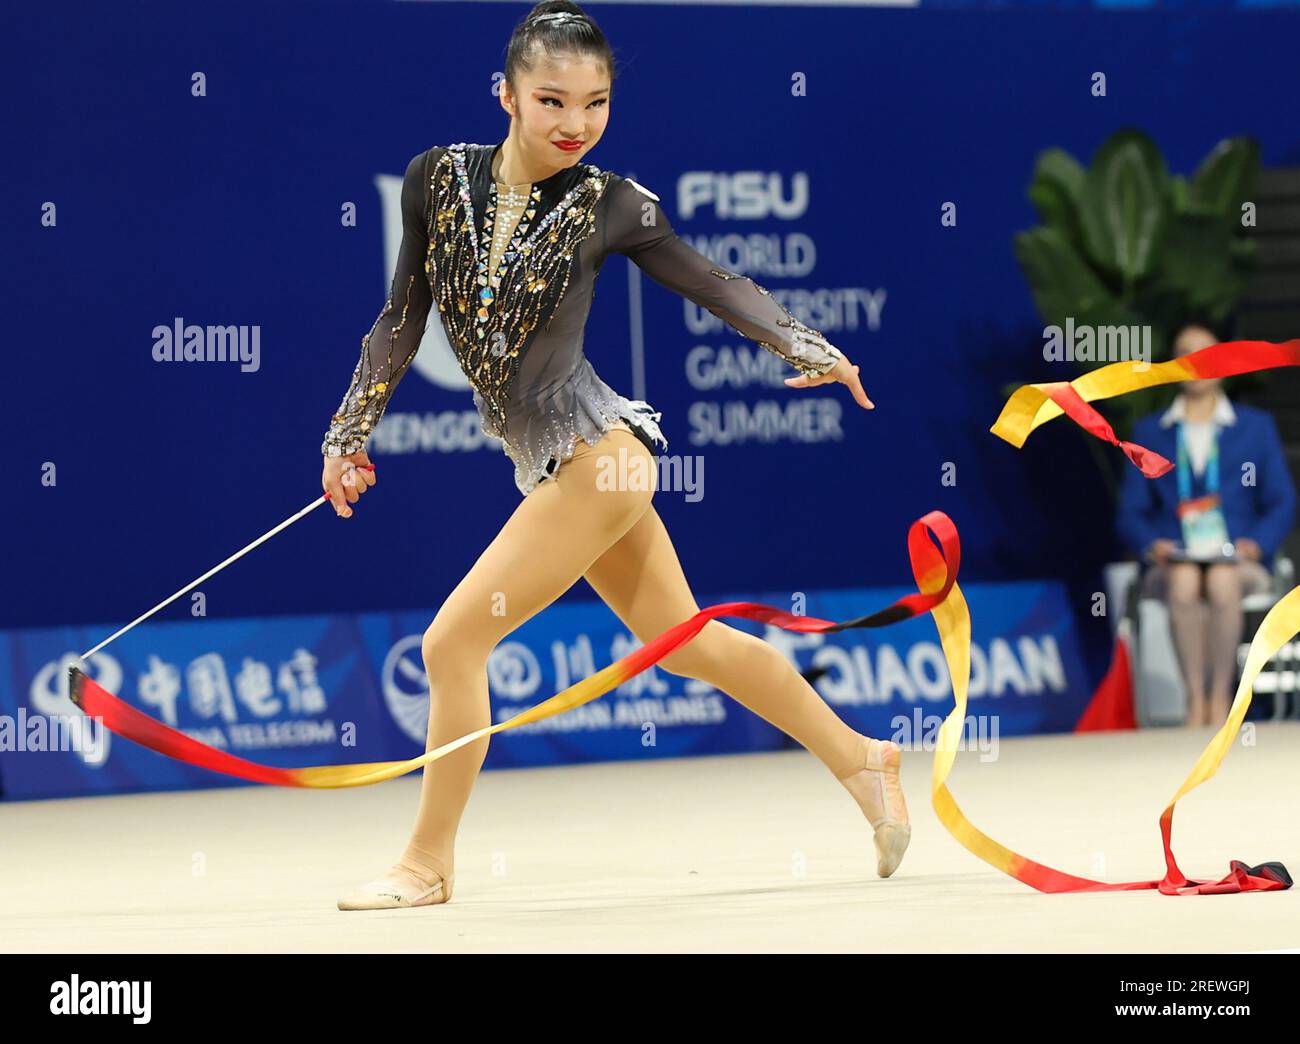 Chengdu, China's Sichuan Province. 30th July, 2023. Suzuki Naruha of Japan  competes during Final Group A Rotation 2 of the Rhythmic Gymnastics  Individual All-Around Final at the 31st FISU Summer World University